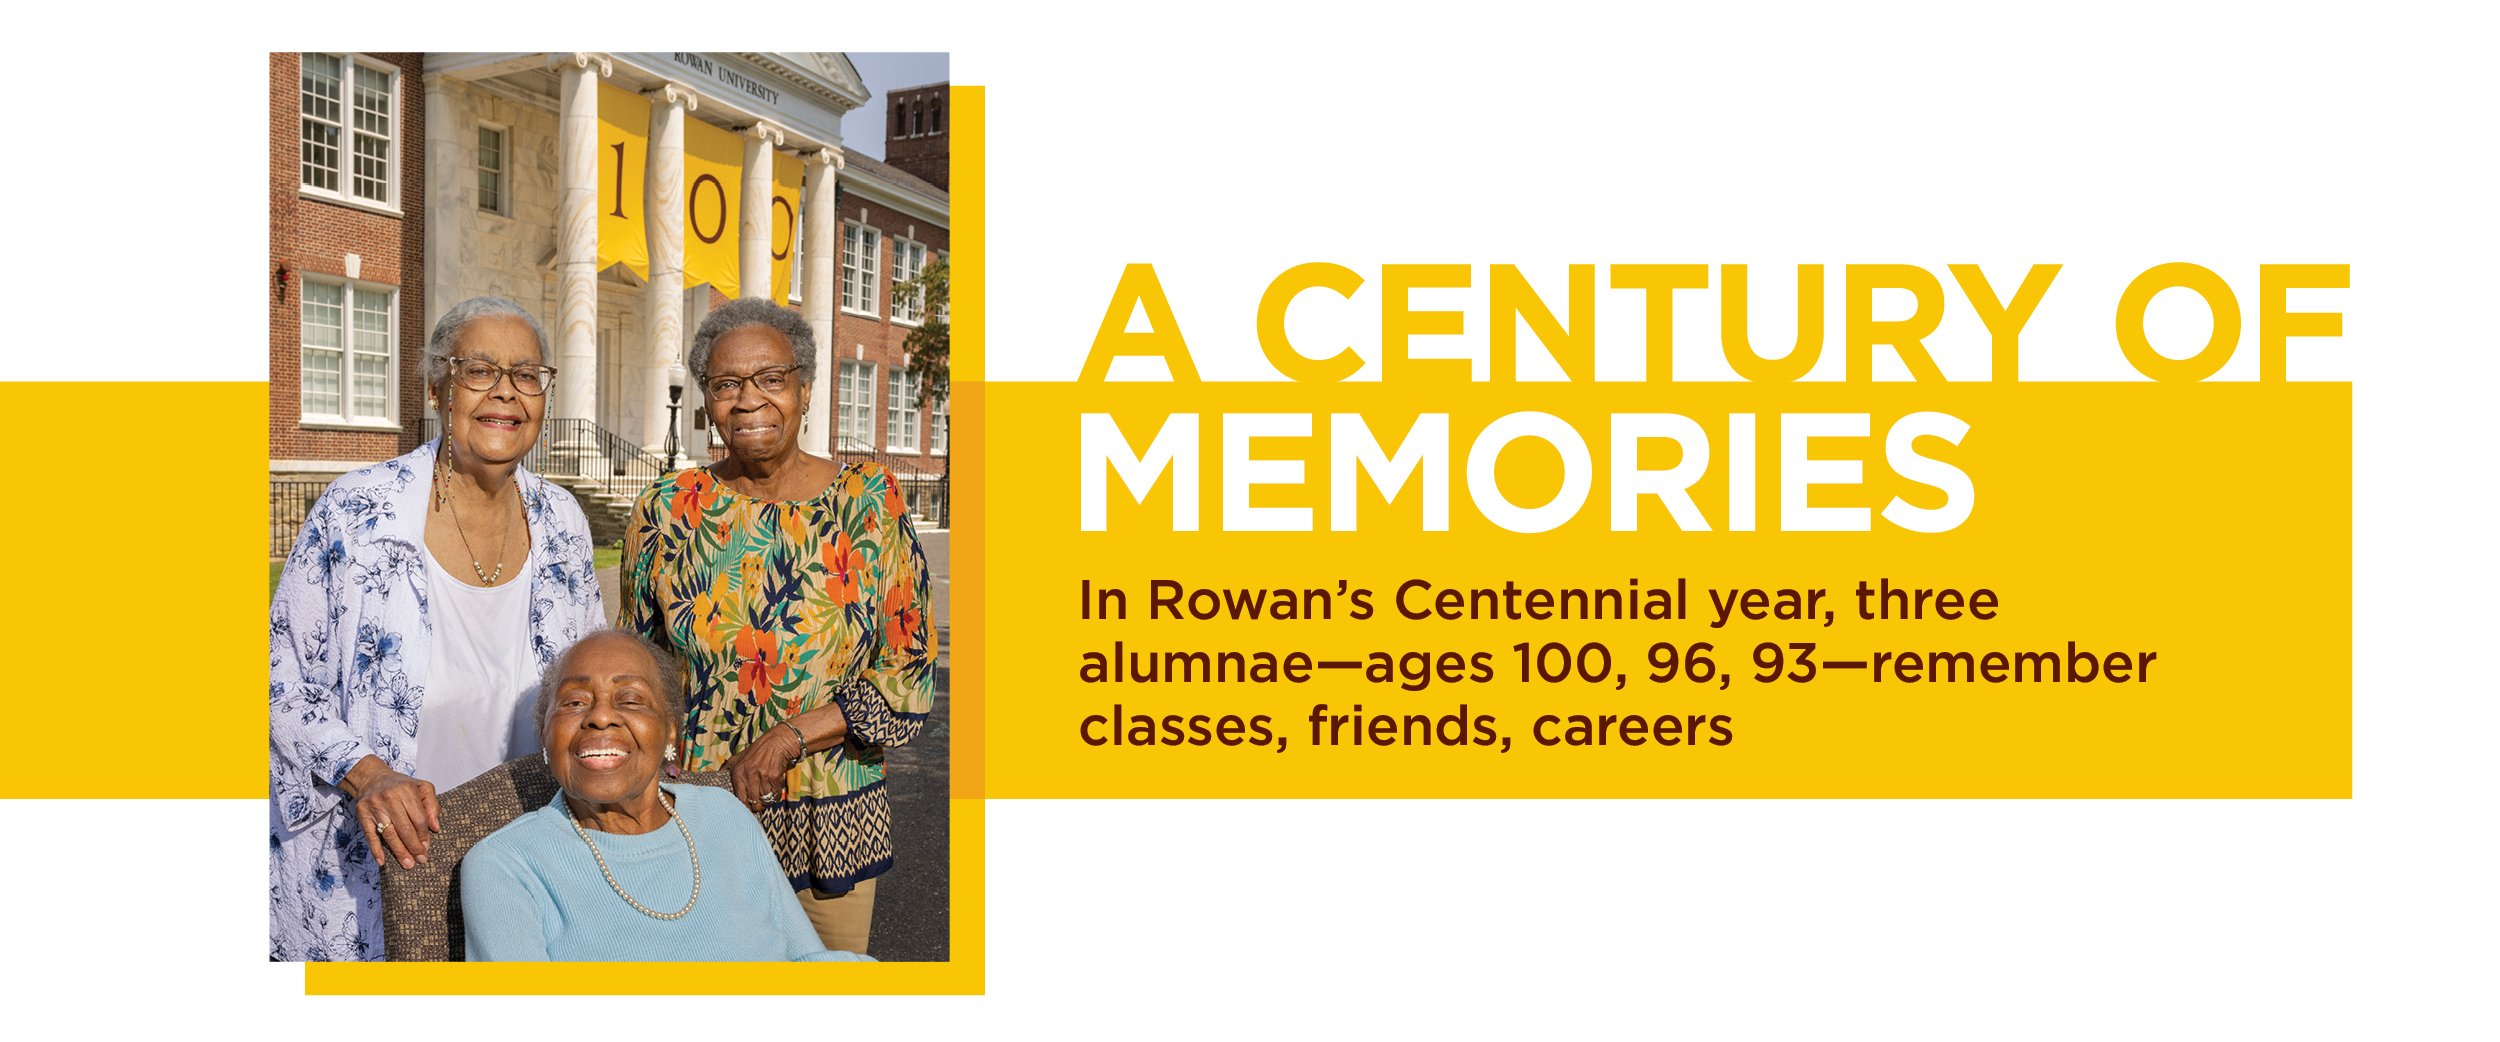 A century of memories: In Rowan's Centennial year, three alumnae—ages 100, 96, 93—remember classes, friends, careers